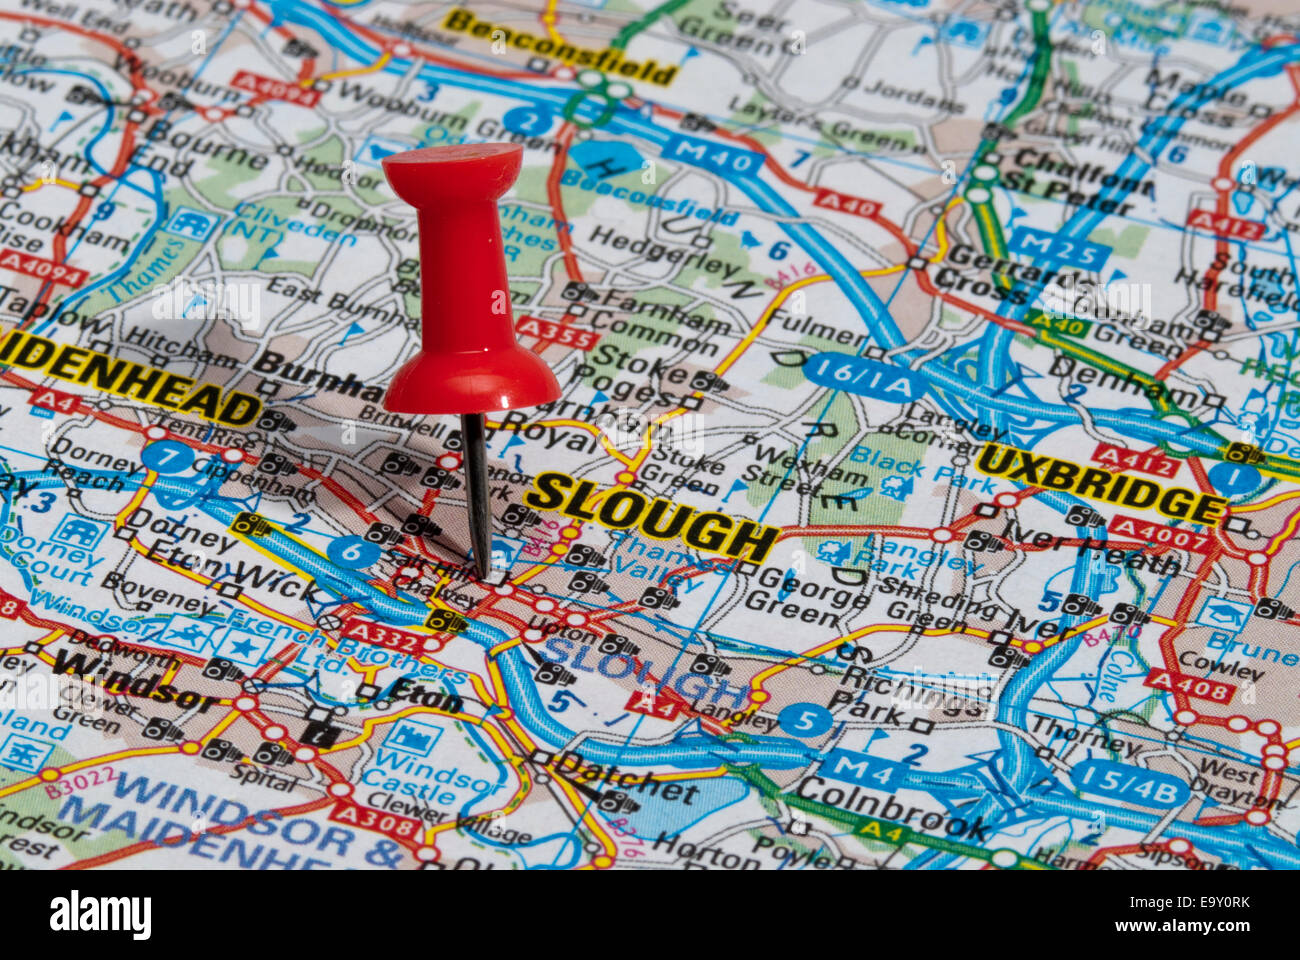 red map pin in road map pointing to city of Slough Stock Photo